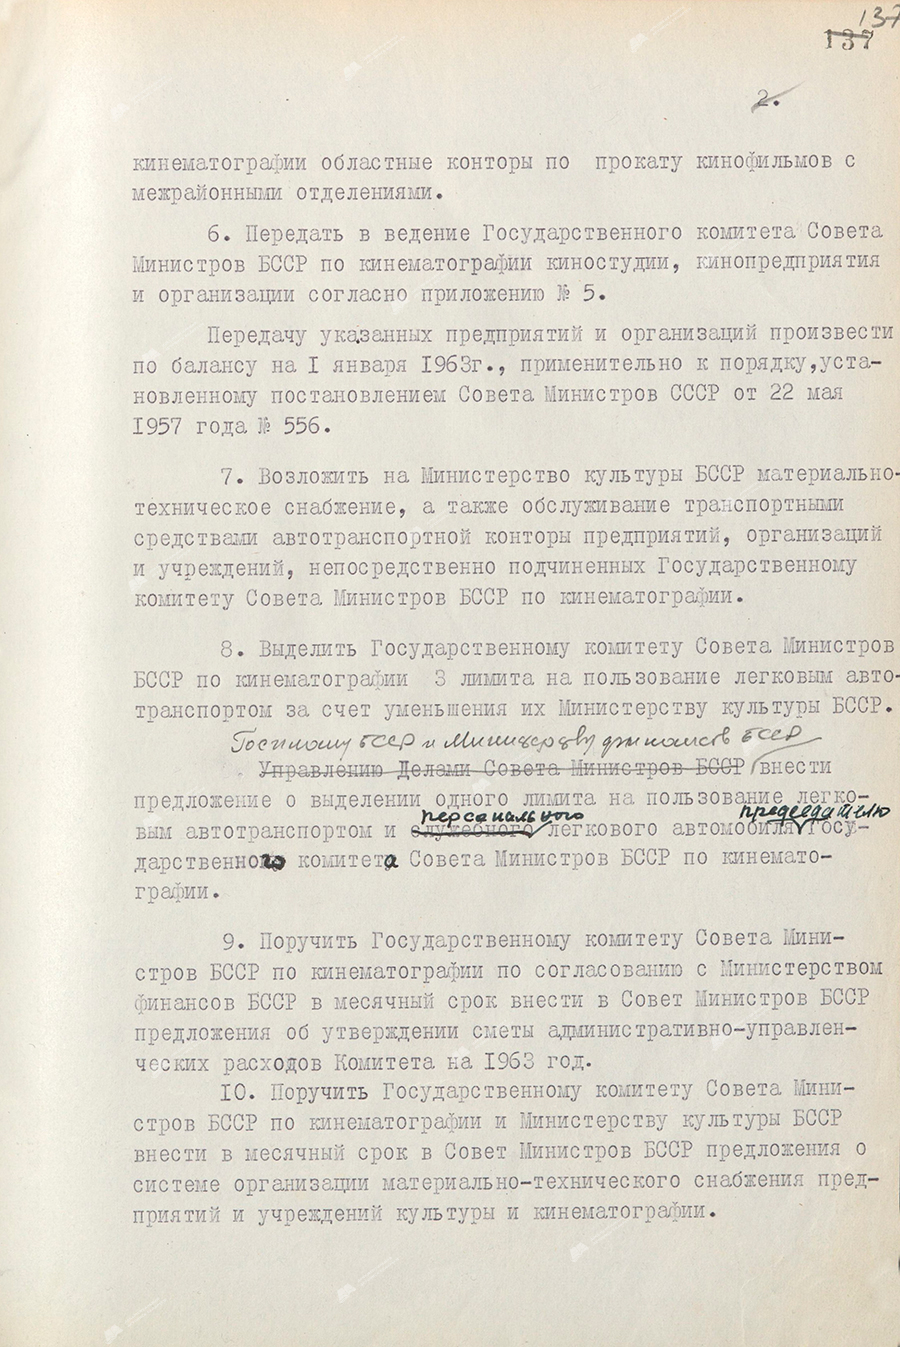 Resolution No. 383 of the Council of Ministers of the BSSR «Issues of the organization of the State Committee of the Council of Ministers of the BSSR on Cinematography»-с. 1